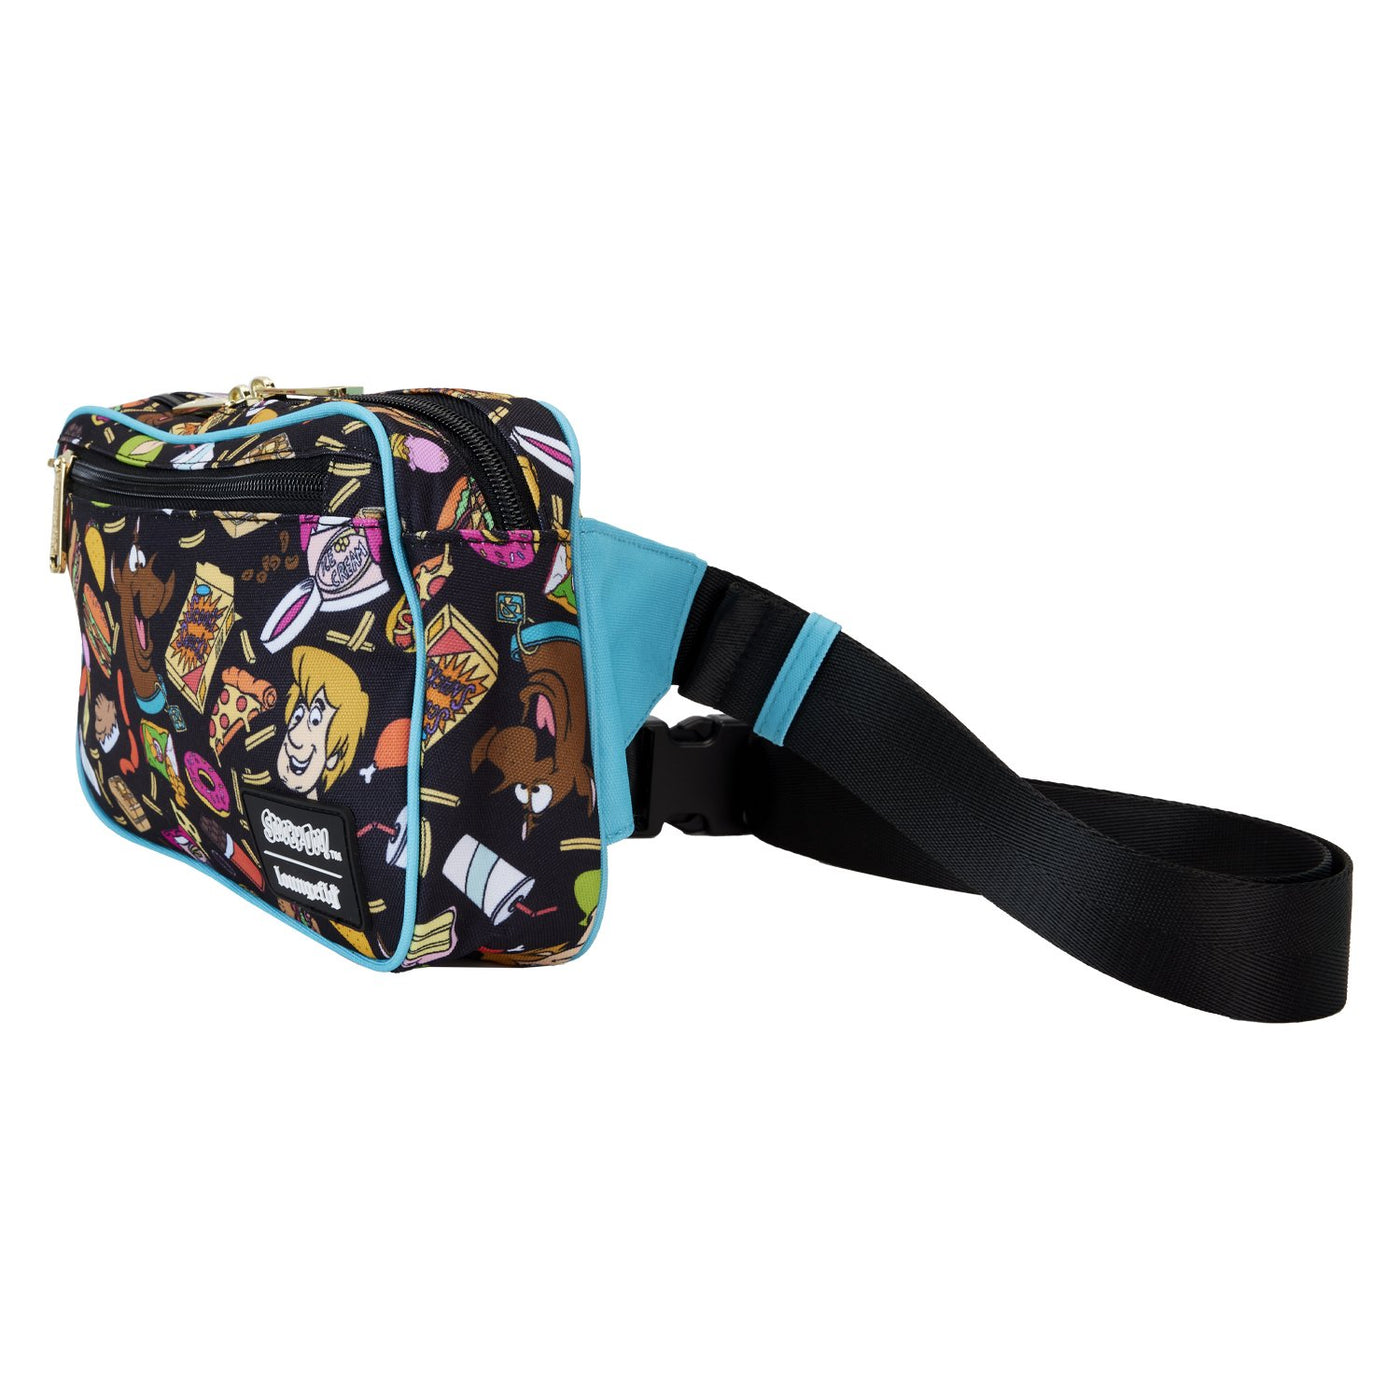 SBDTB0004 - Loungefly Warner Brothers Scooby-Doo Munchies Allover Print Nylon Waist Bag - Side View